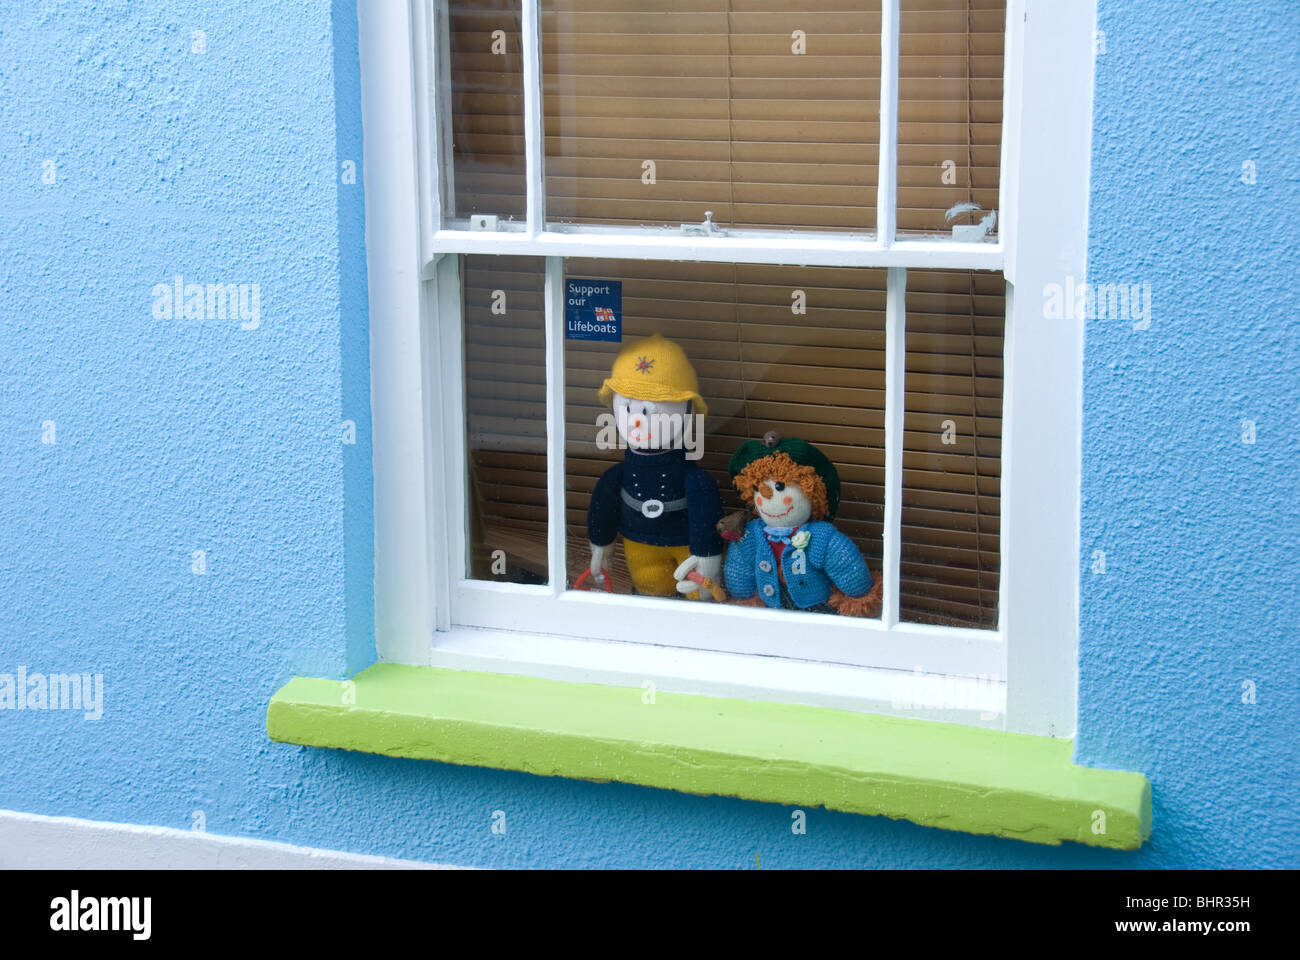 Knitted dolls fireman and scarecrow in a window raising money for lifeboats in Devon UK Stock Photo